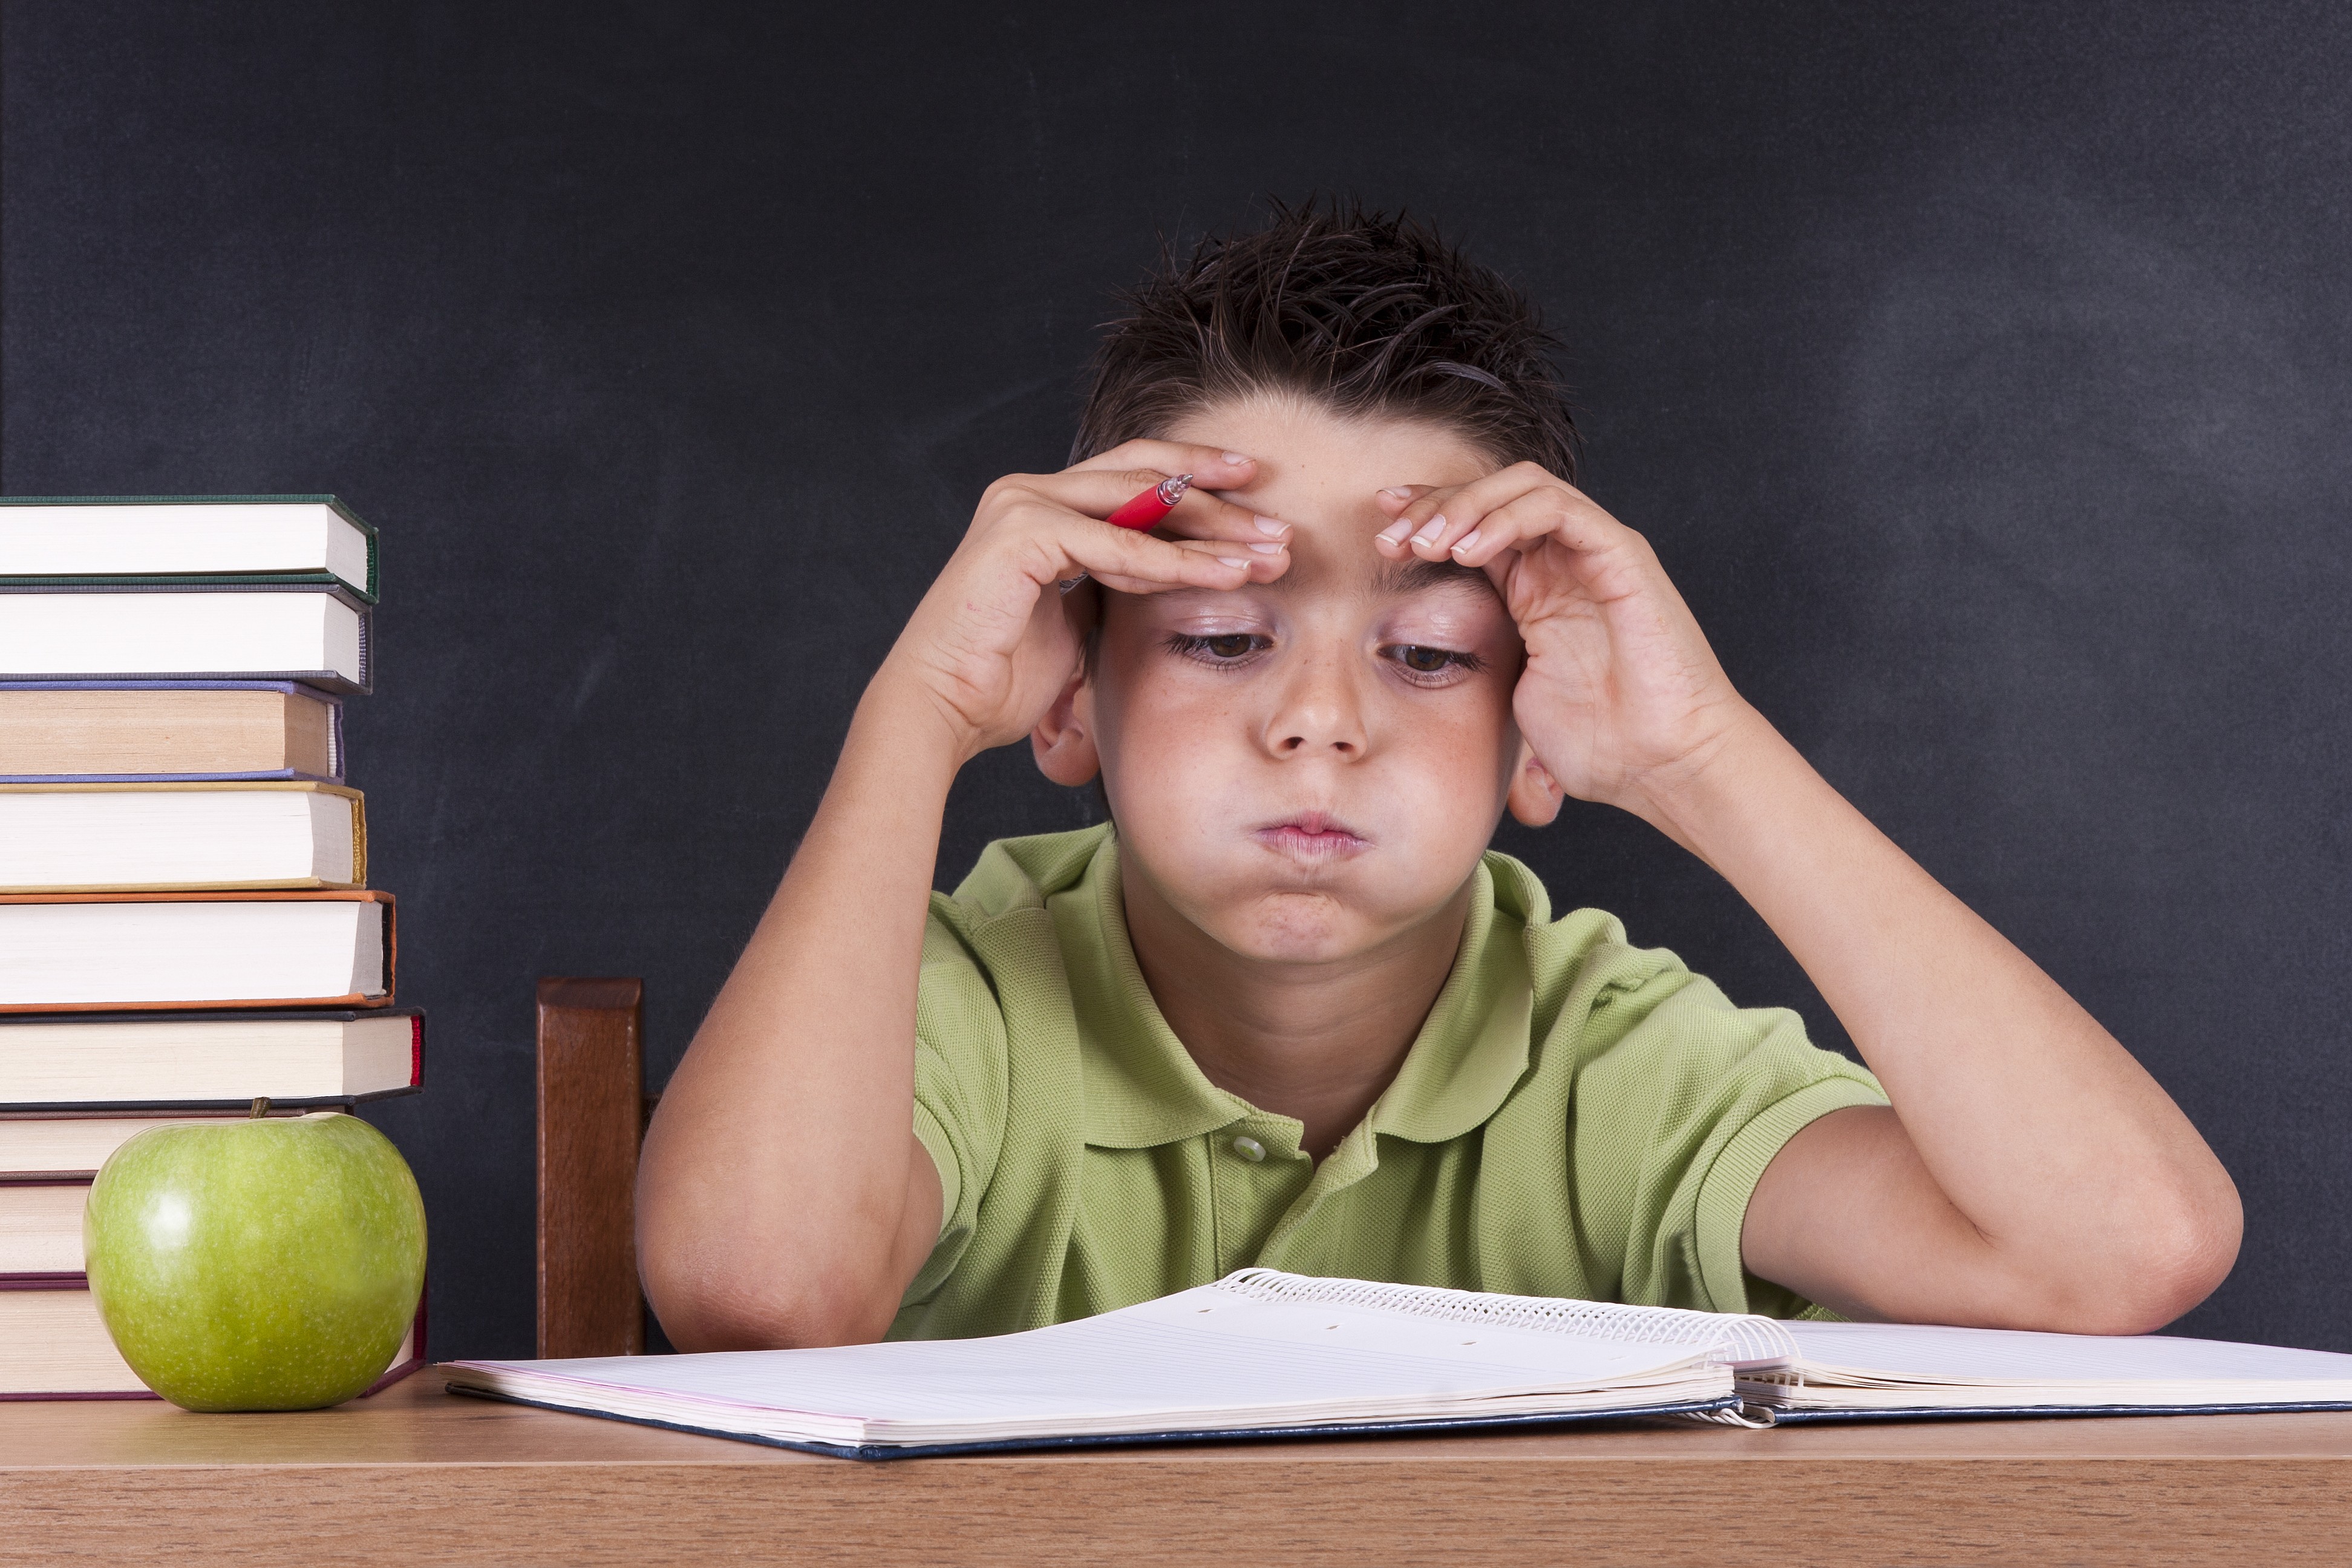 13 tips for overcoming focus problems in children #1